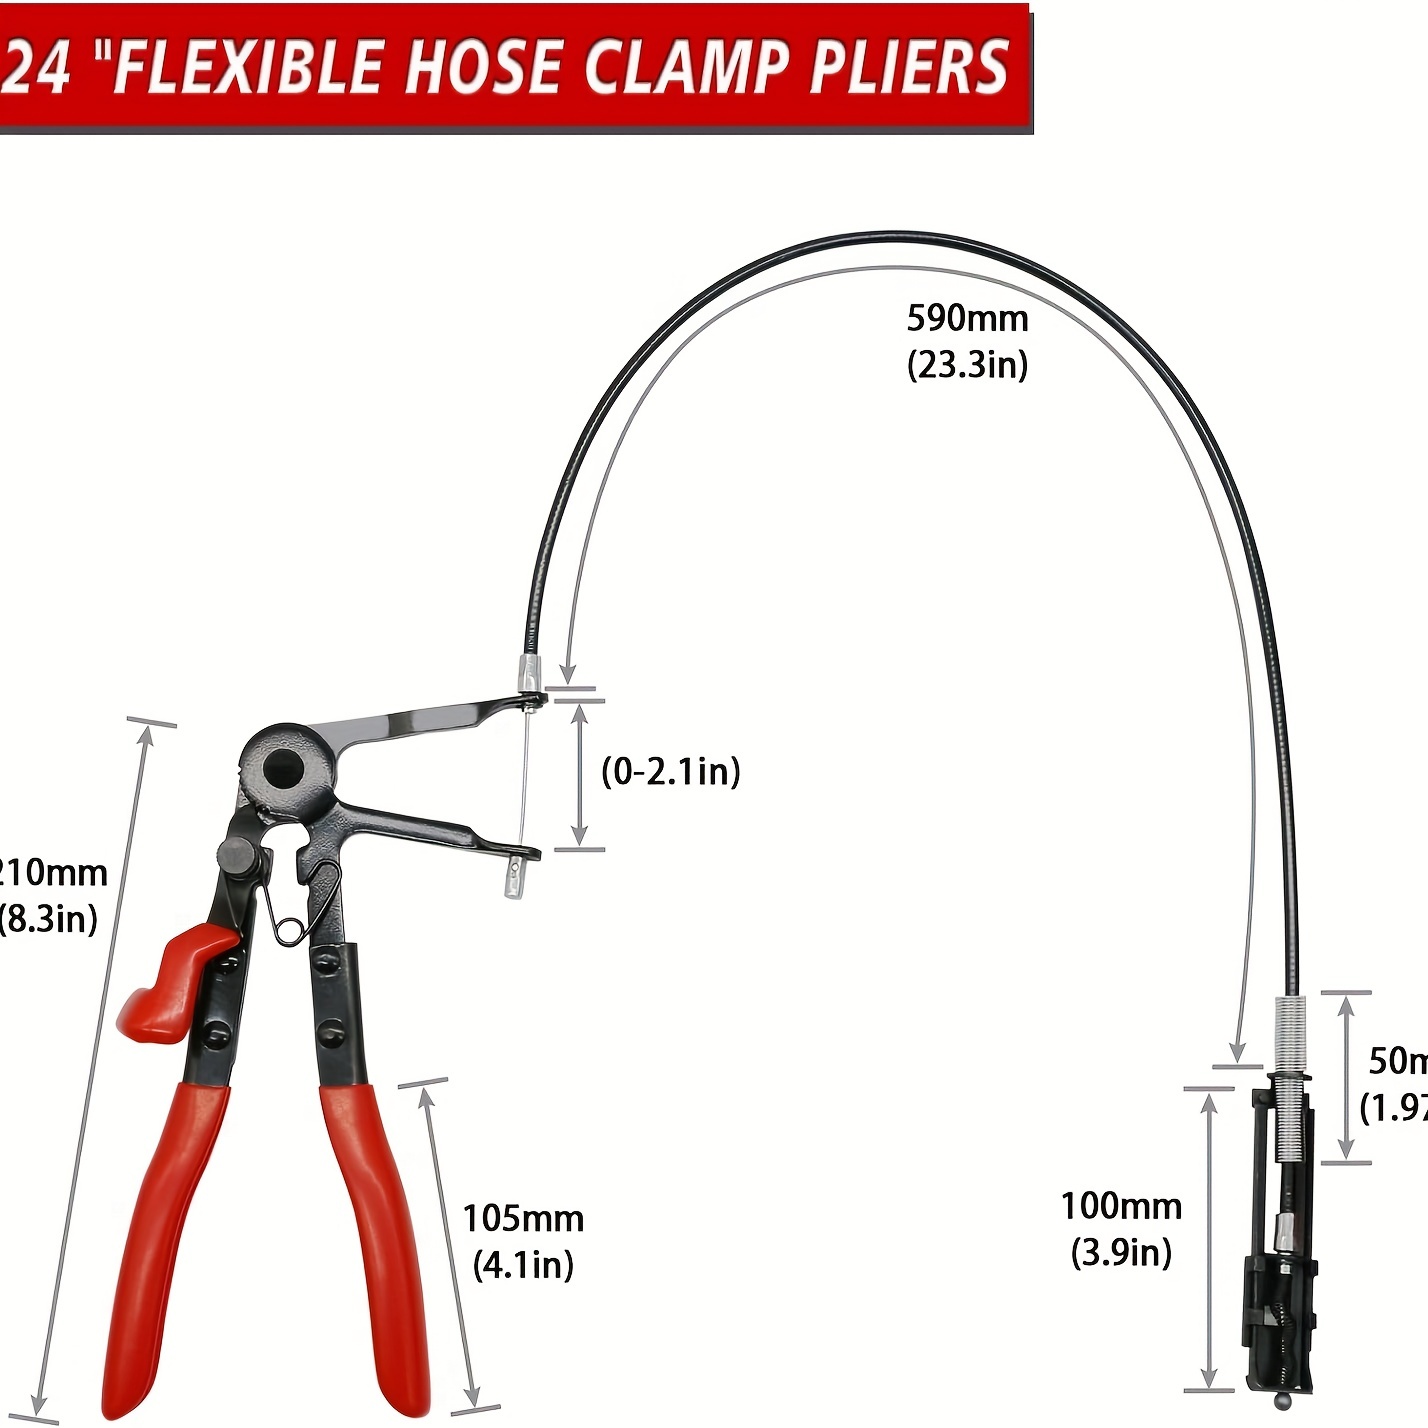 Radiator Hose Clamp Pliers Tool, Clamp Tight Wire Tool, Type Flexible Hose  Clamp Plier with 24 inch Cable